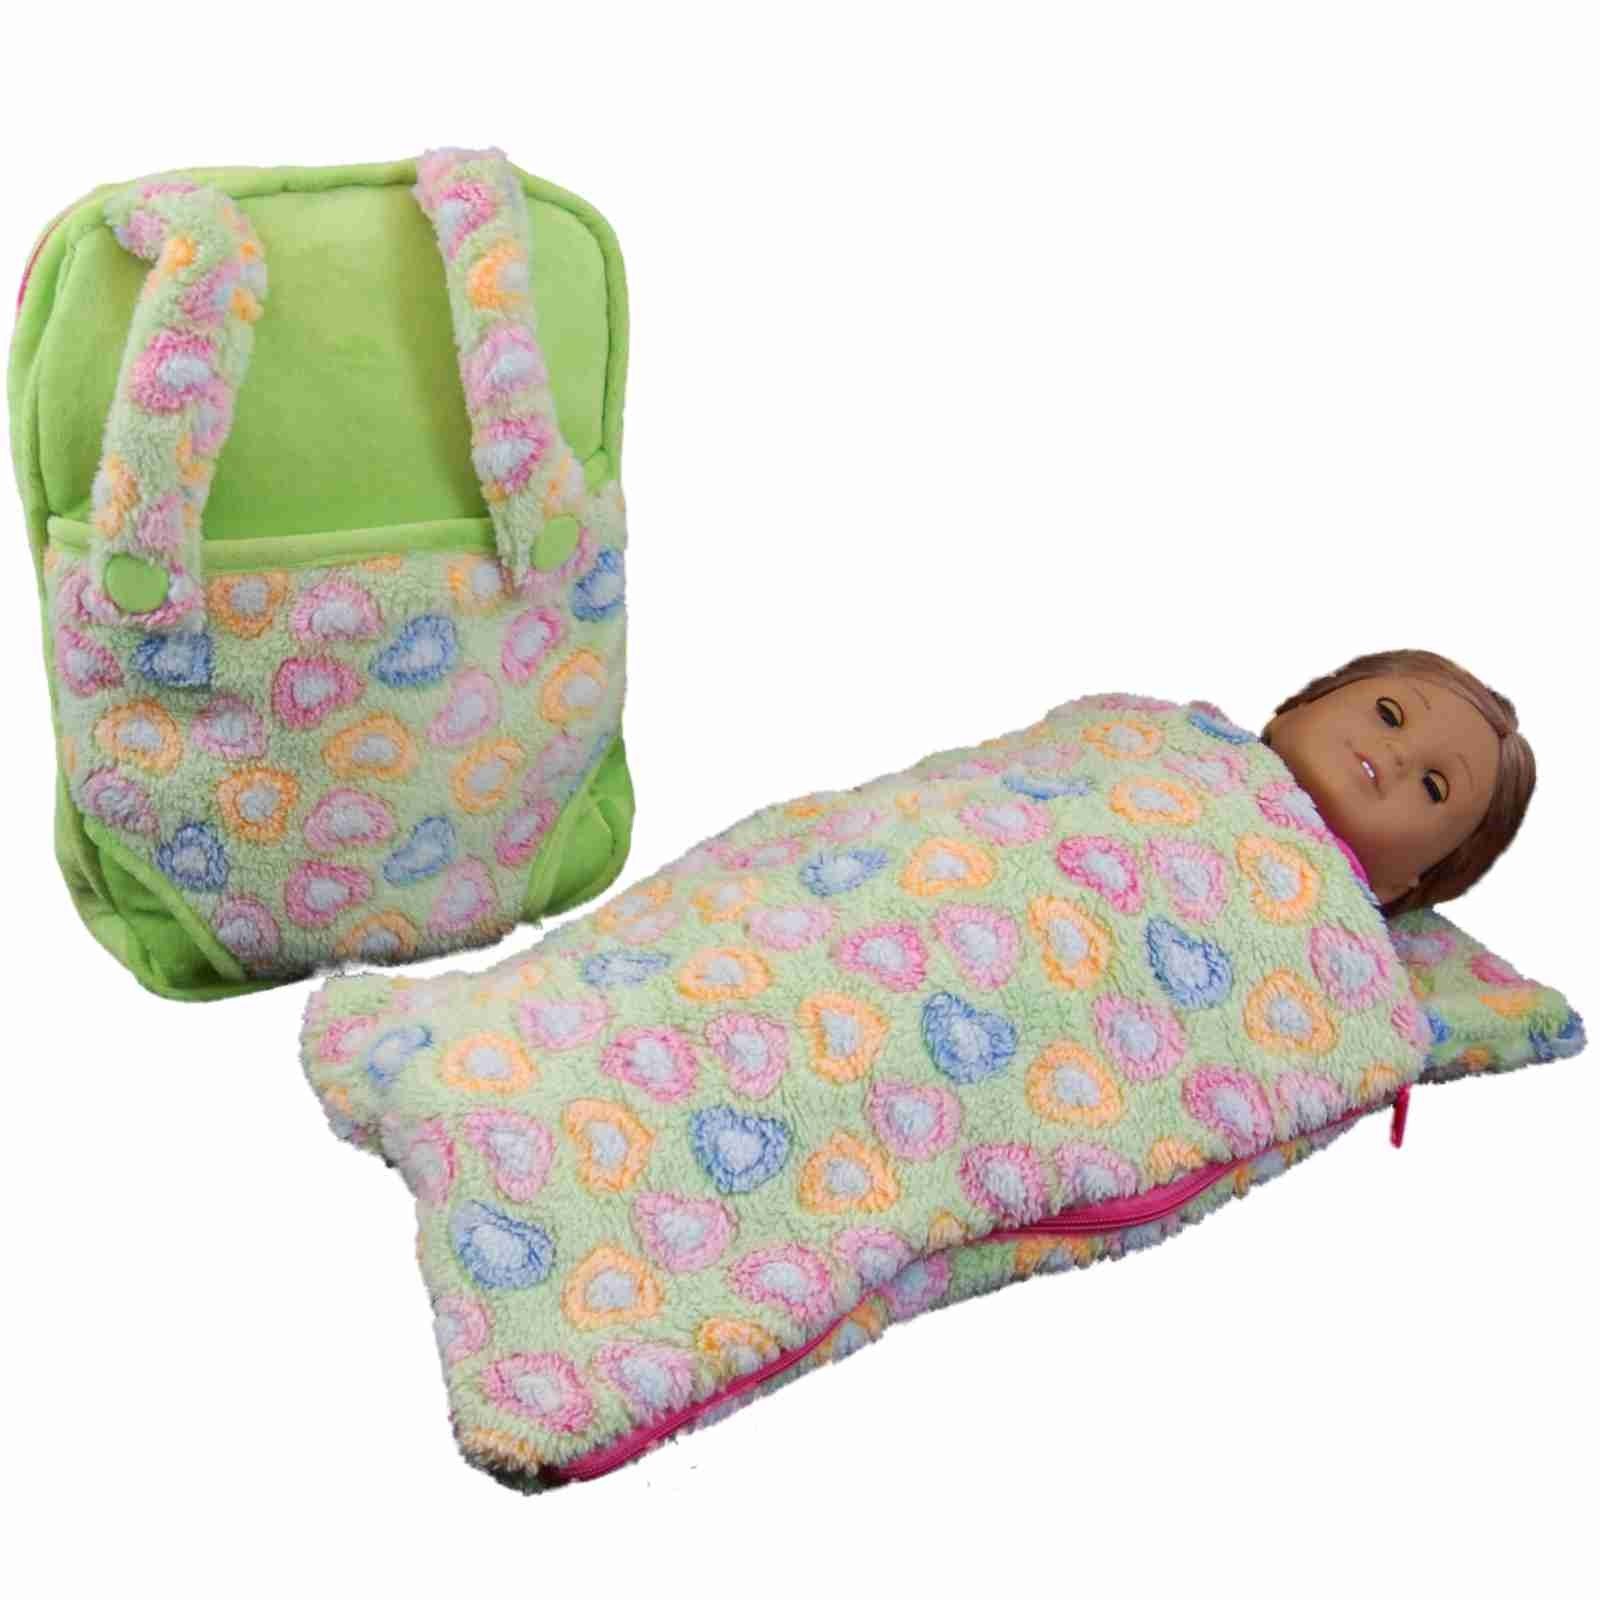 Childs Backpack Includes 18" Doll Carrier and Sleeping Bag ...